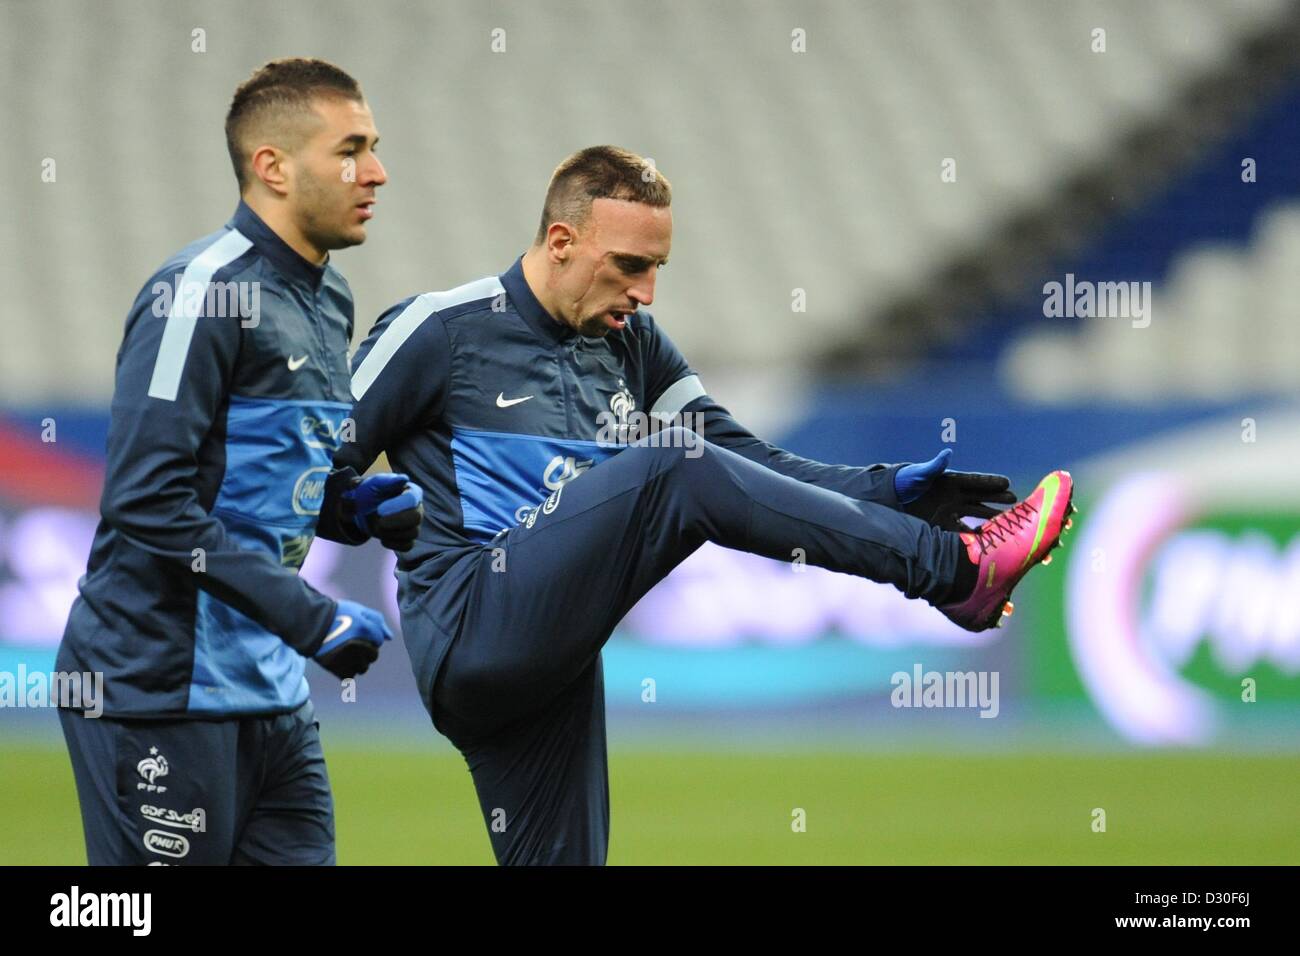 Paris, France. 5th February 2013. France's Karim Benzema (L) and Franck Ribery takes part in French national soccer team practice at the Stade de France in Paris, France, 05 February 2013. German will play France on 06 February 2013. Photo: ANDREAS GEBERT/dpa/Alamy Live News Stock Photo